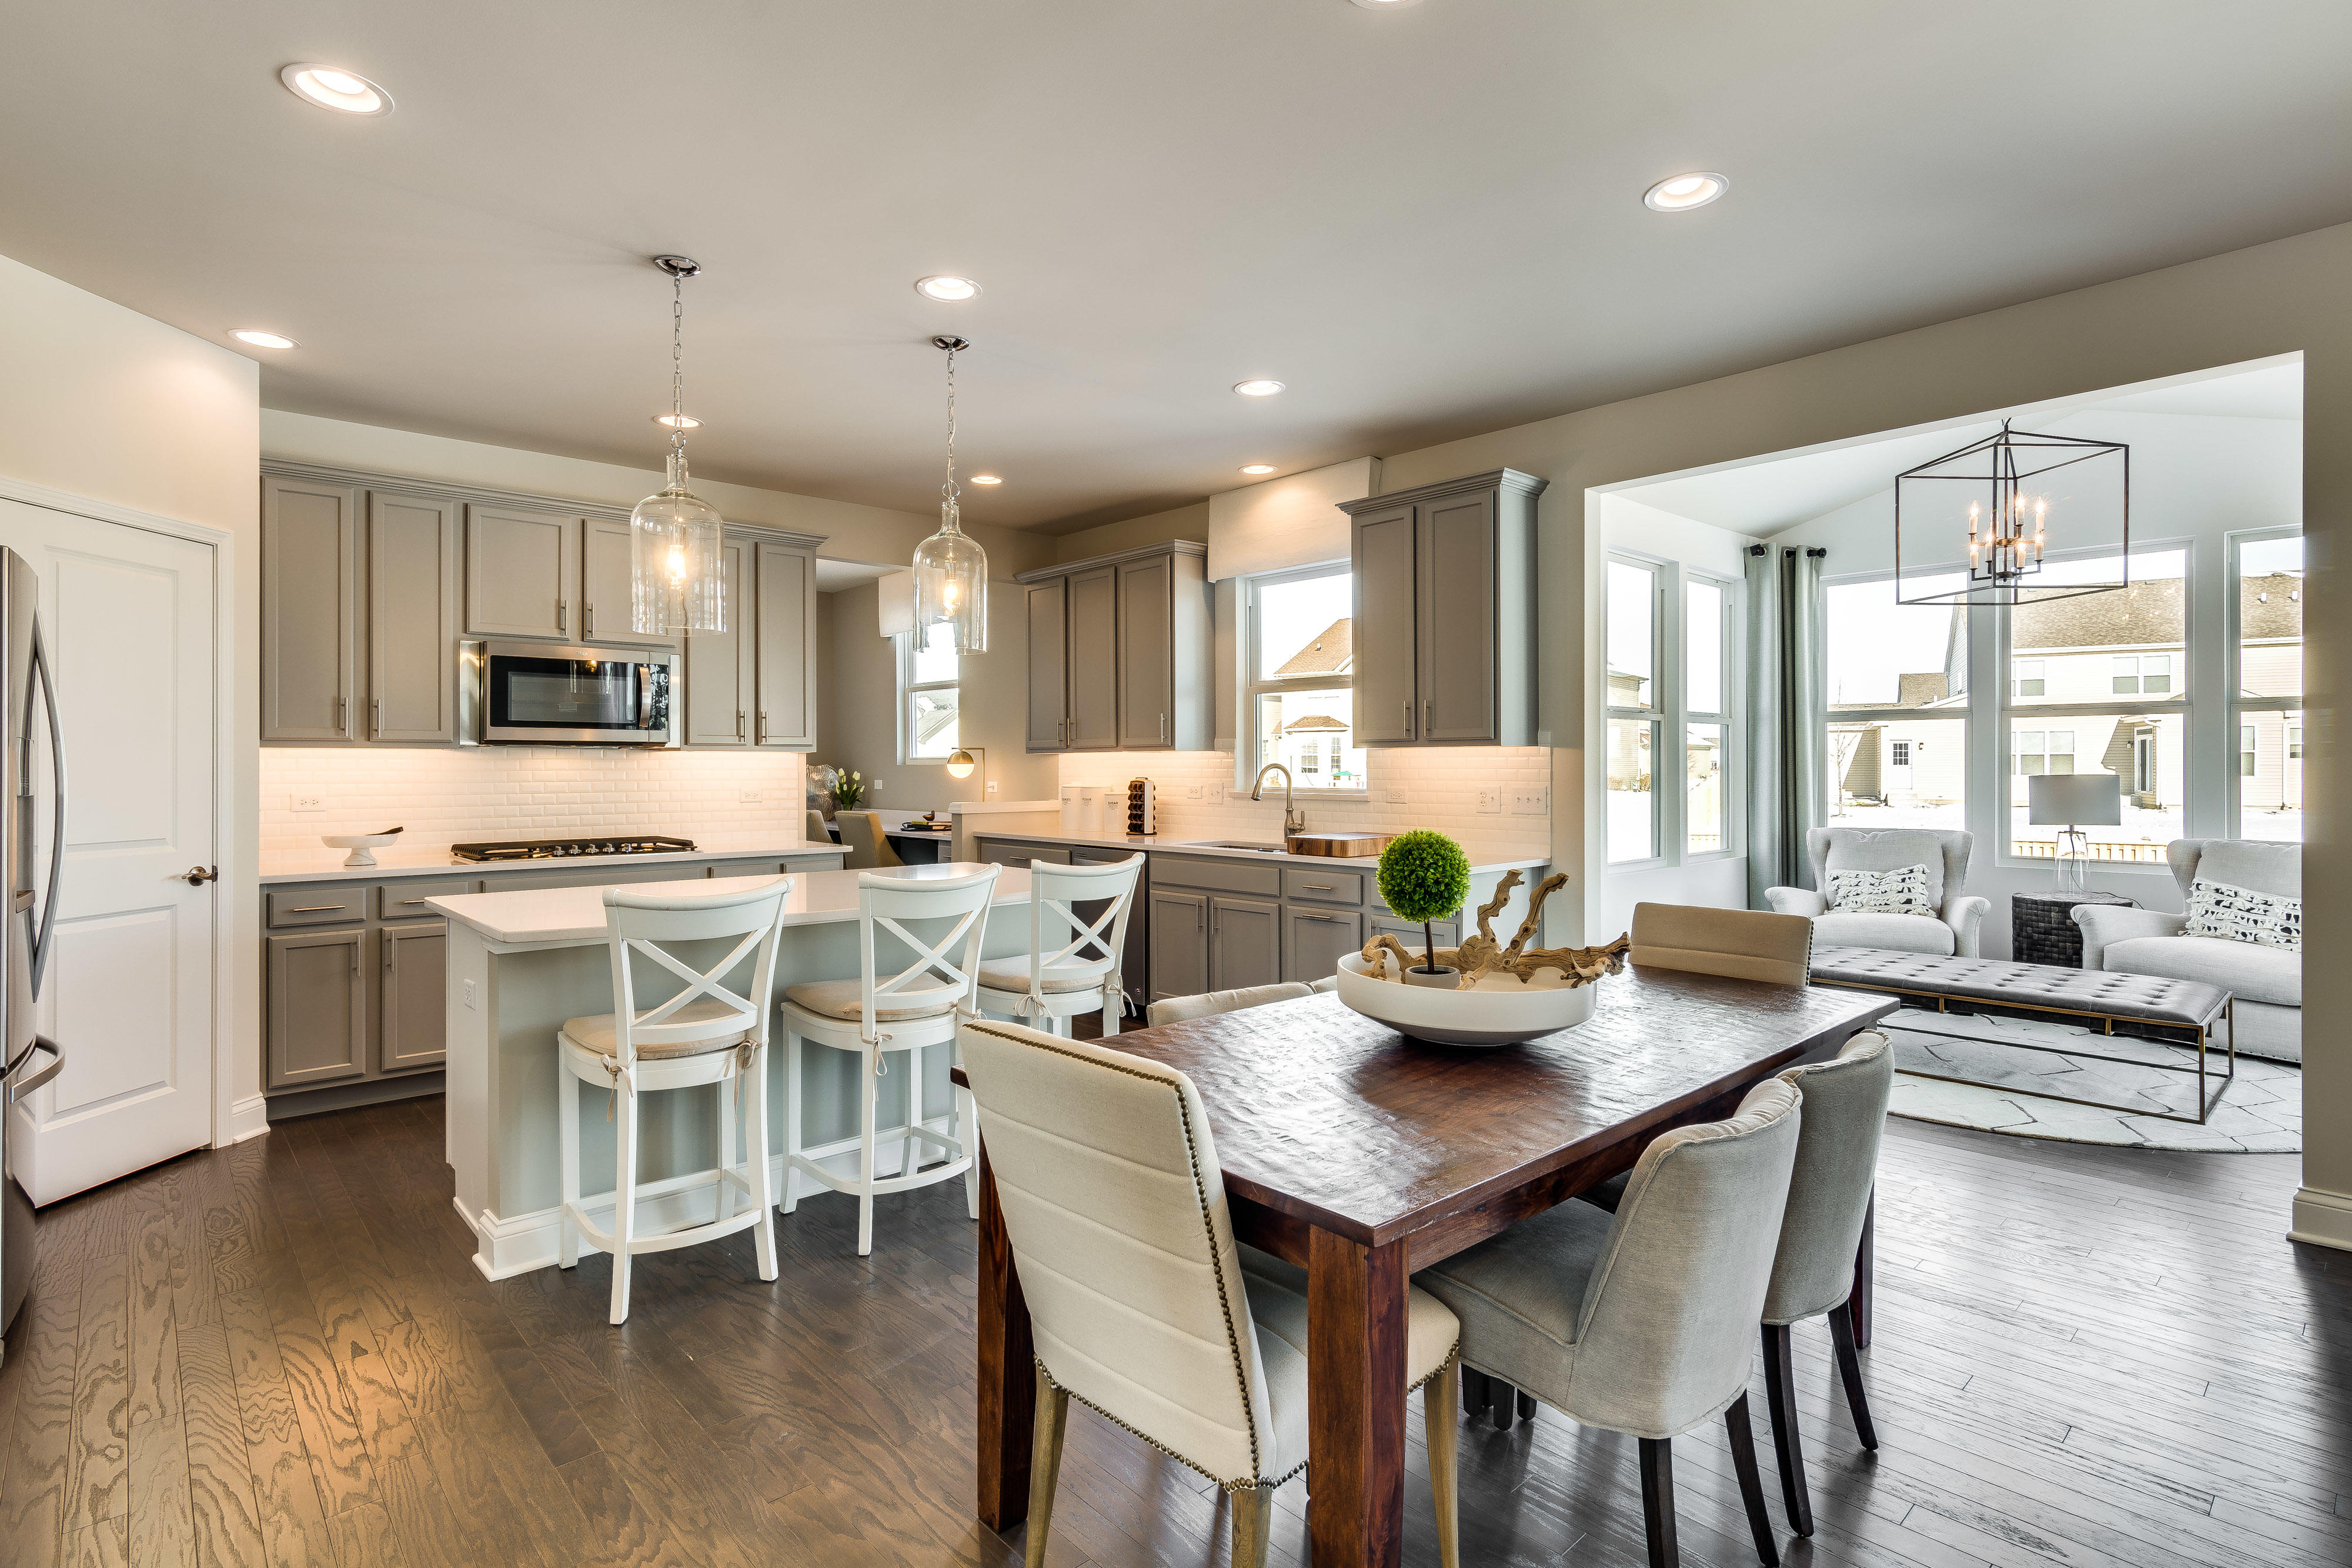 Creekside Crossing by Pulte Homes Photo